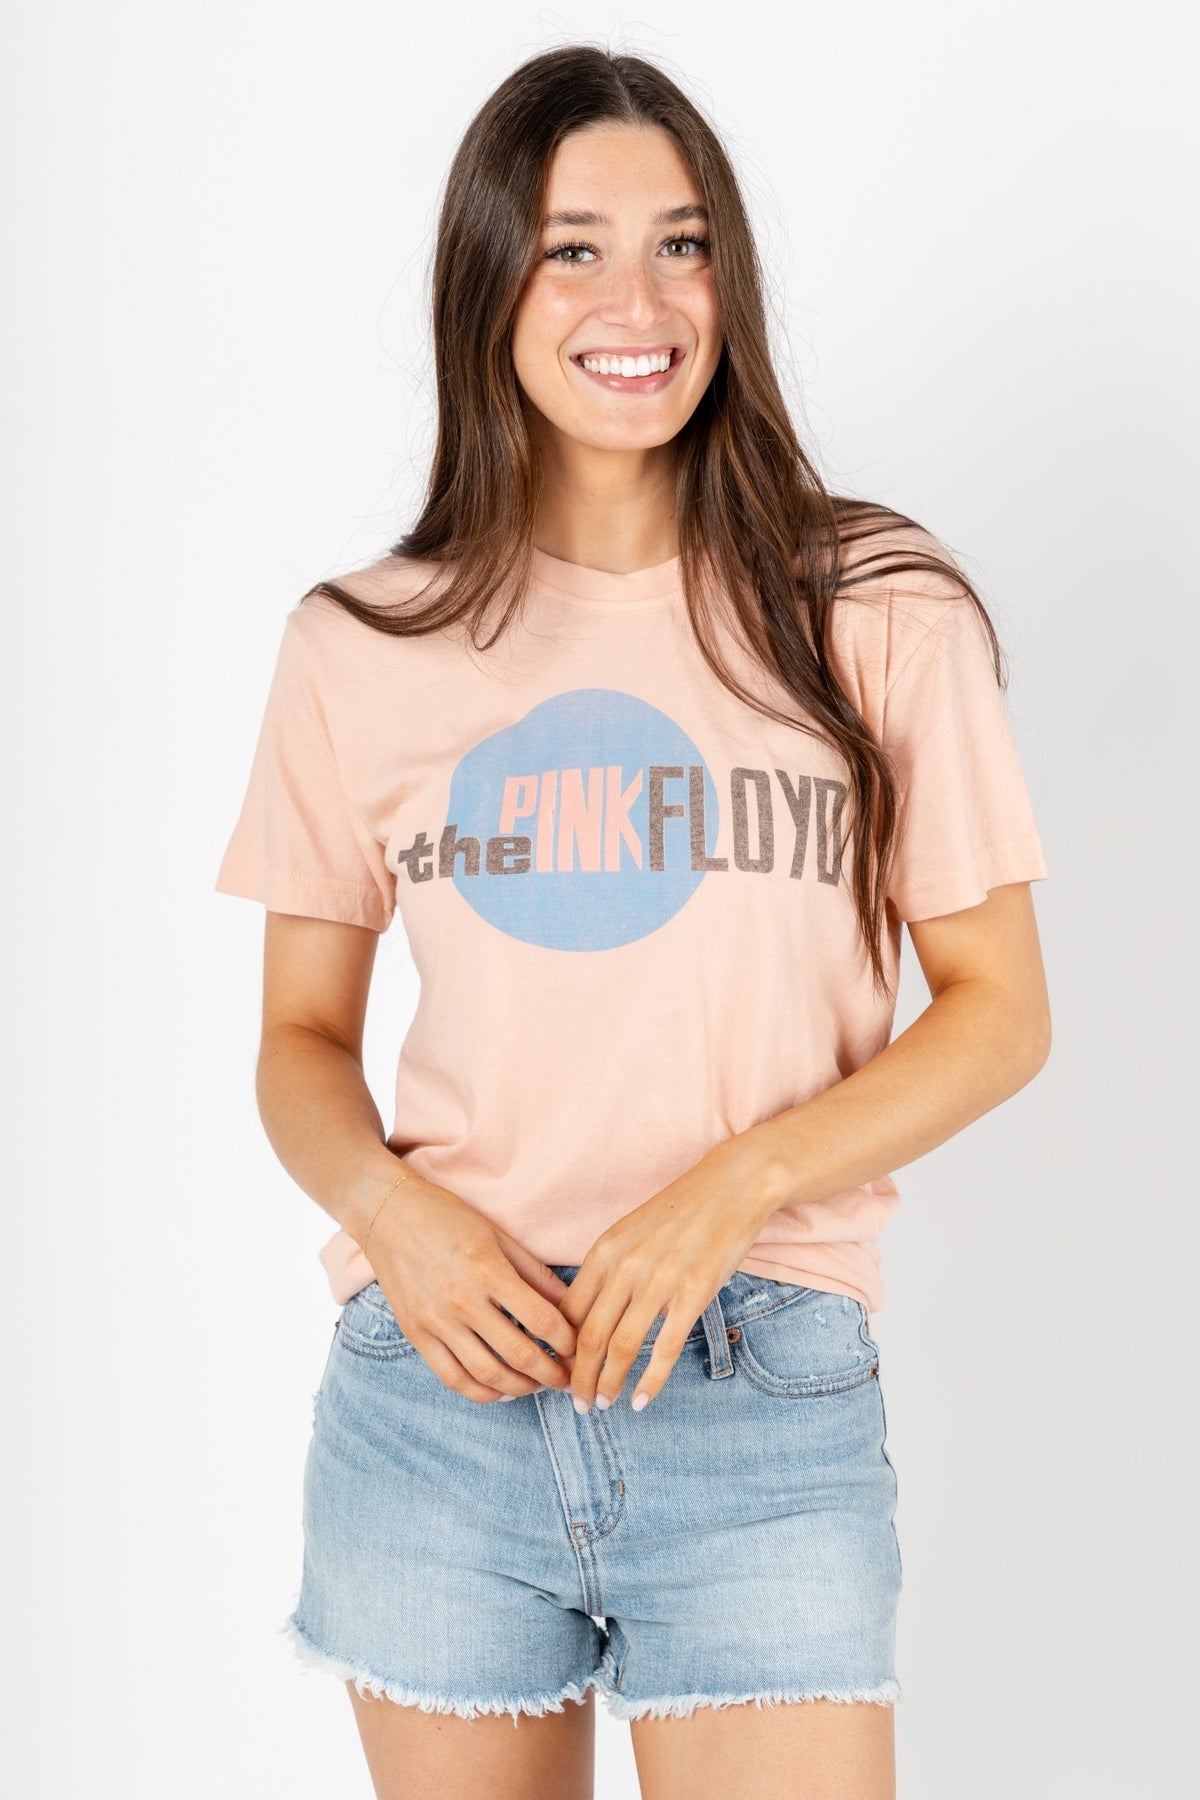 Pink Floyd vintage fade t-shirt blush - Trendy Band T-Shirts and Sweatshirts at Lush Fashion Lounge Boutique in Oklahoma City